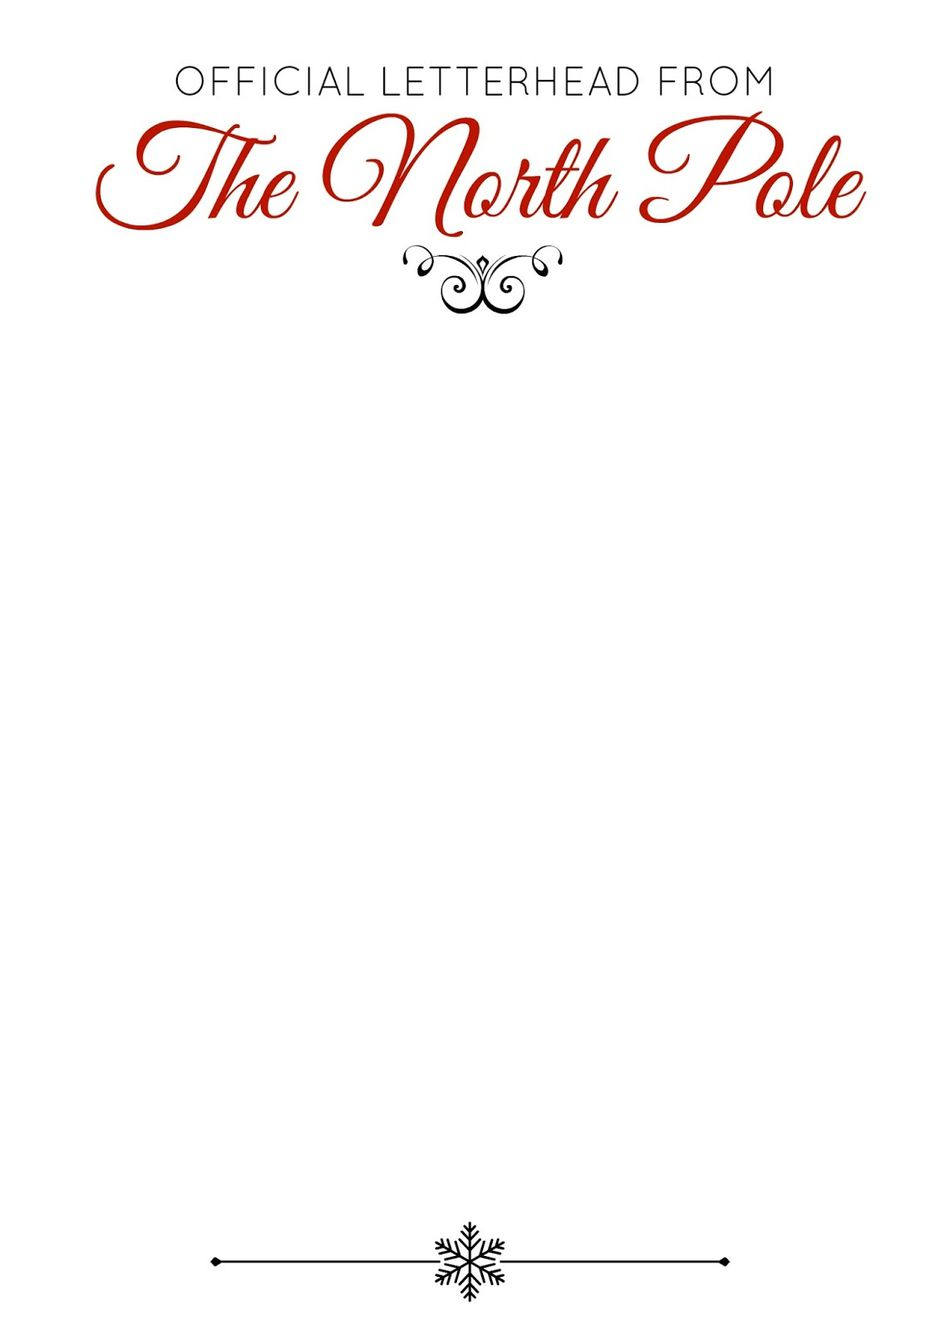 North Pole Letter Template - 76 Free Christmas Stationery and Letterheads